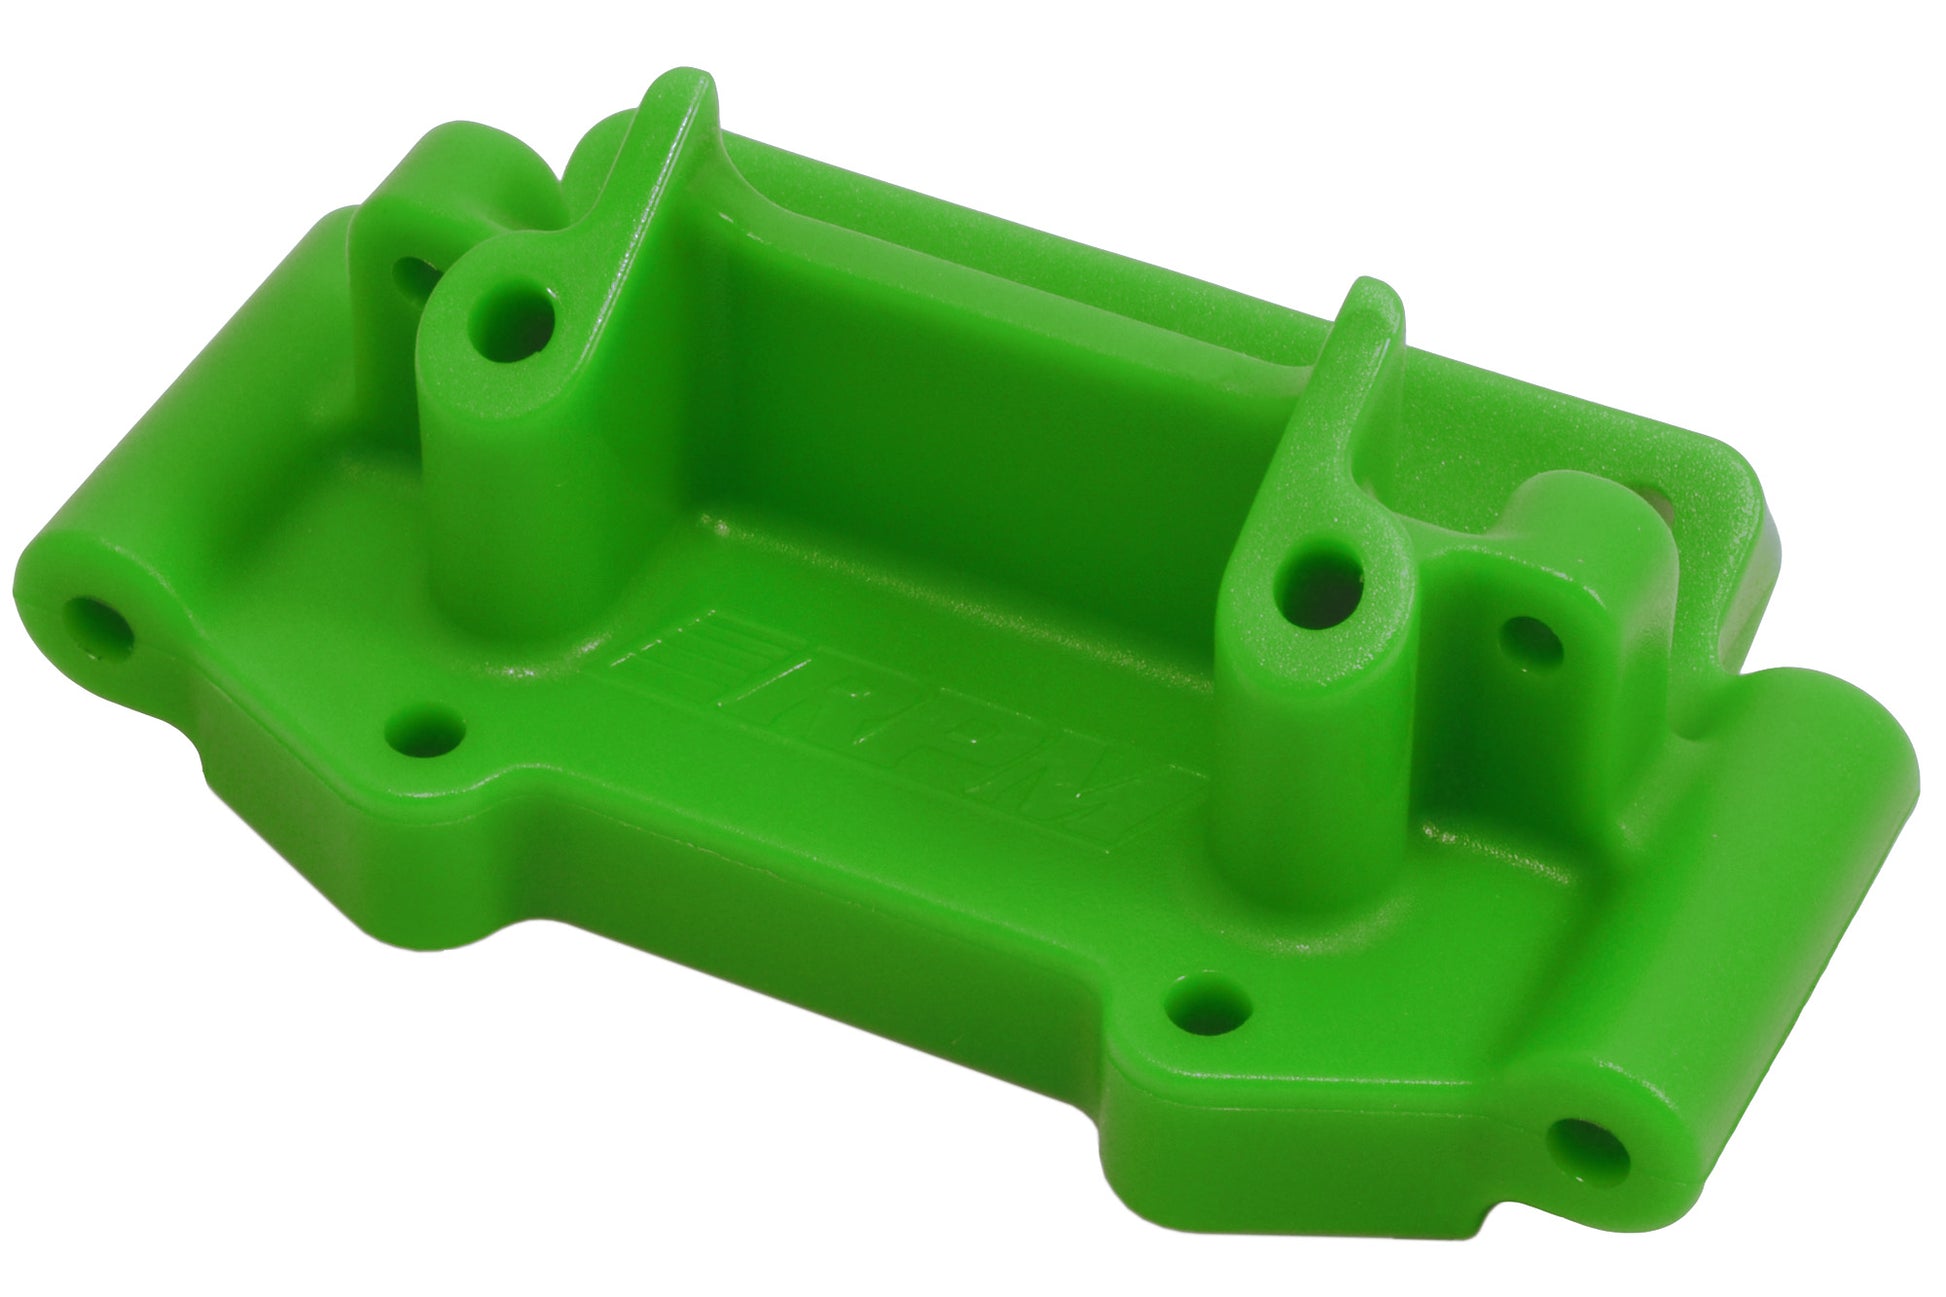 Green Front Bulkhead for Traxxas 1/10 2WD Vehicles RPM-73754